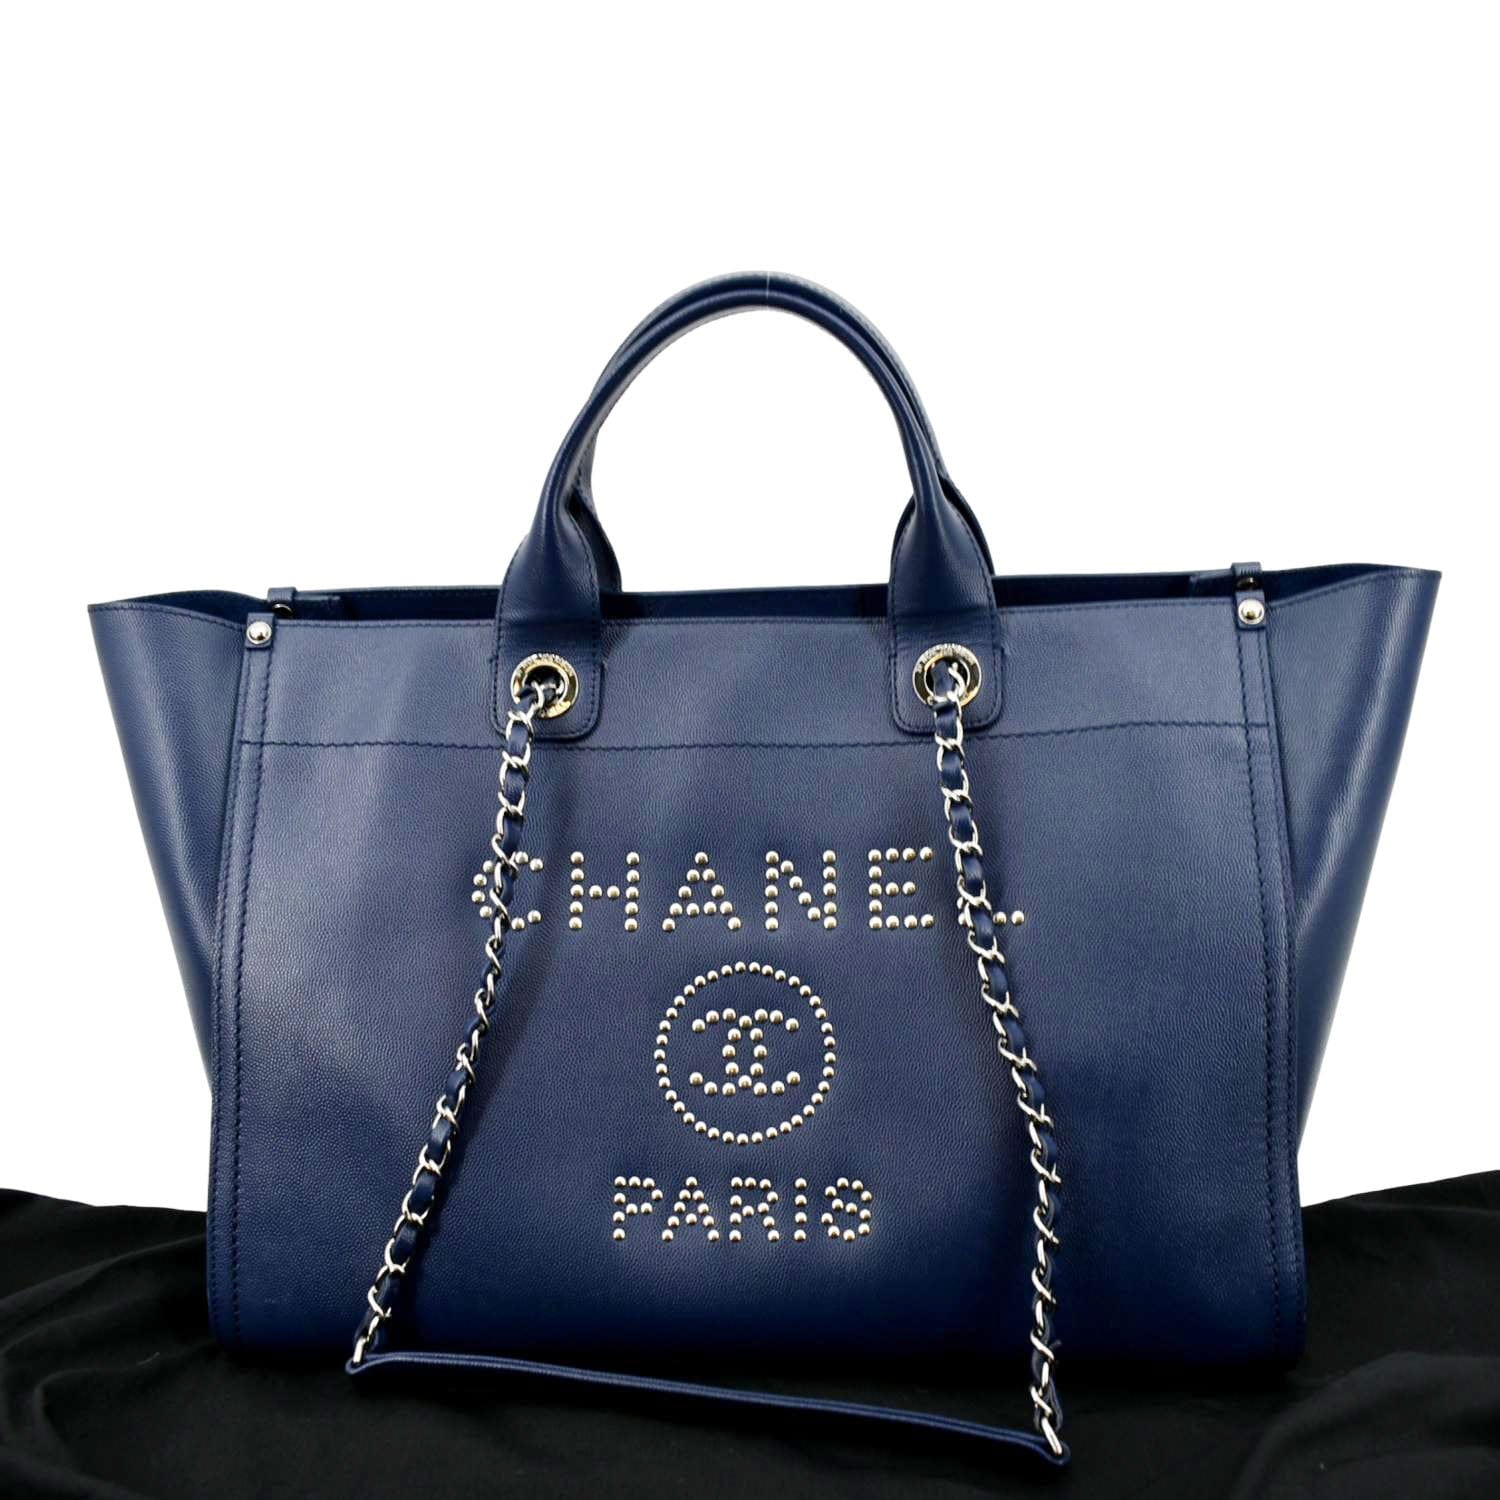 Chanel 22S Light Blue Medium Deauville Tote with Silver Hardware